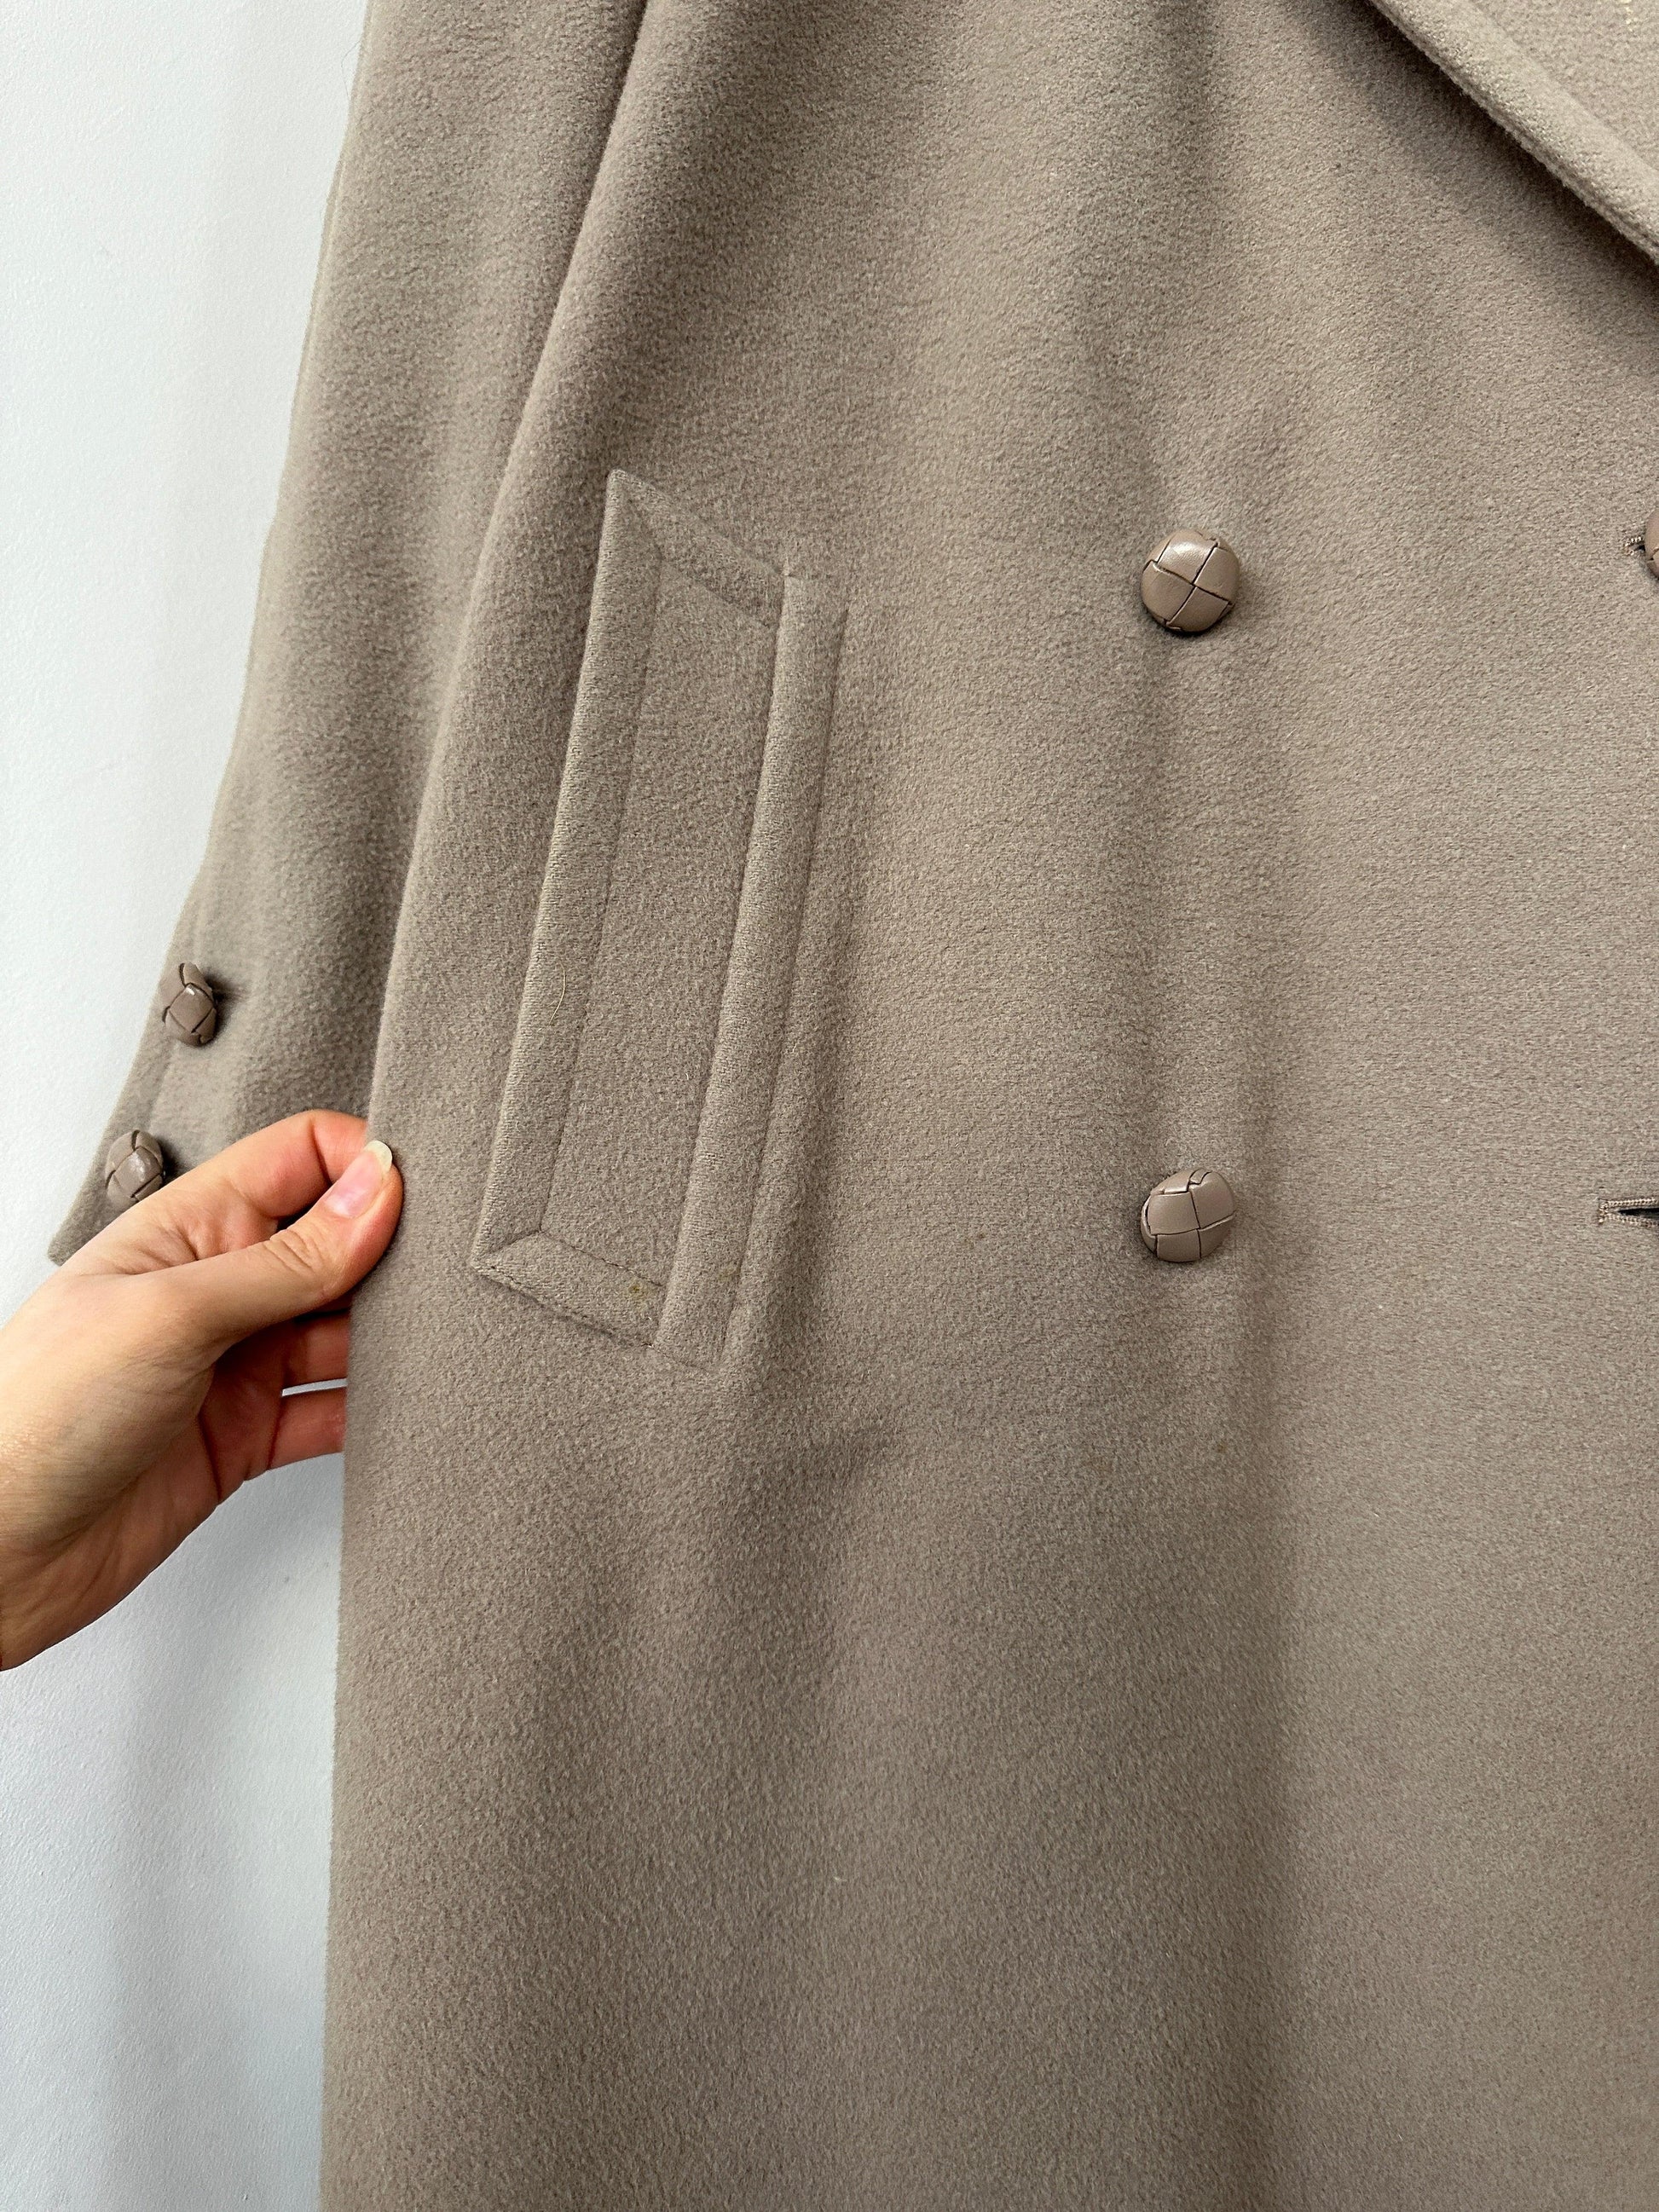 Vintage Wool Cashmere Double Breasted Coat - M - Known Source